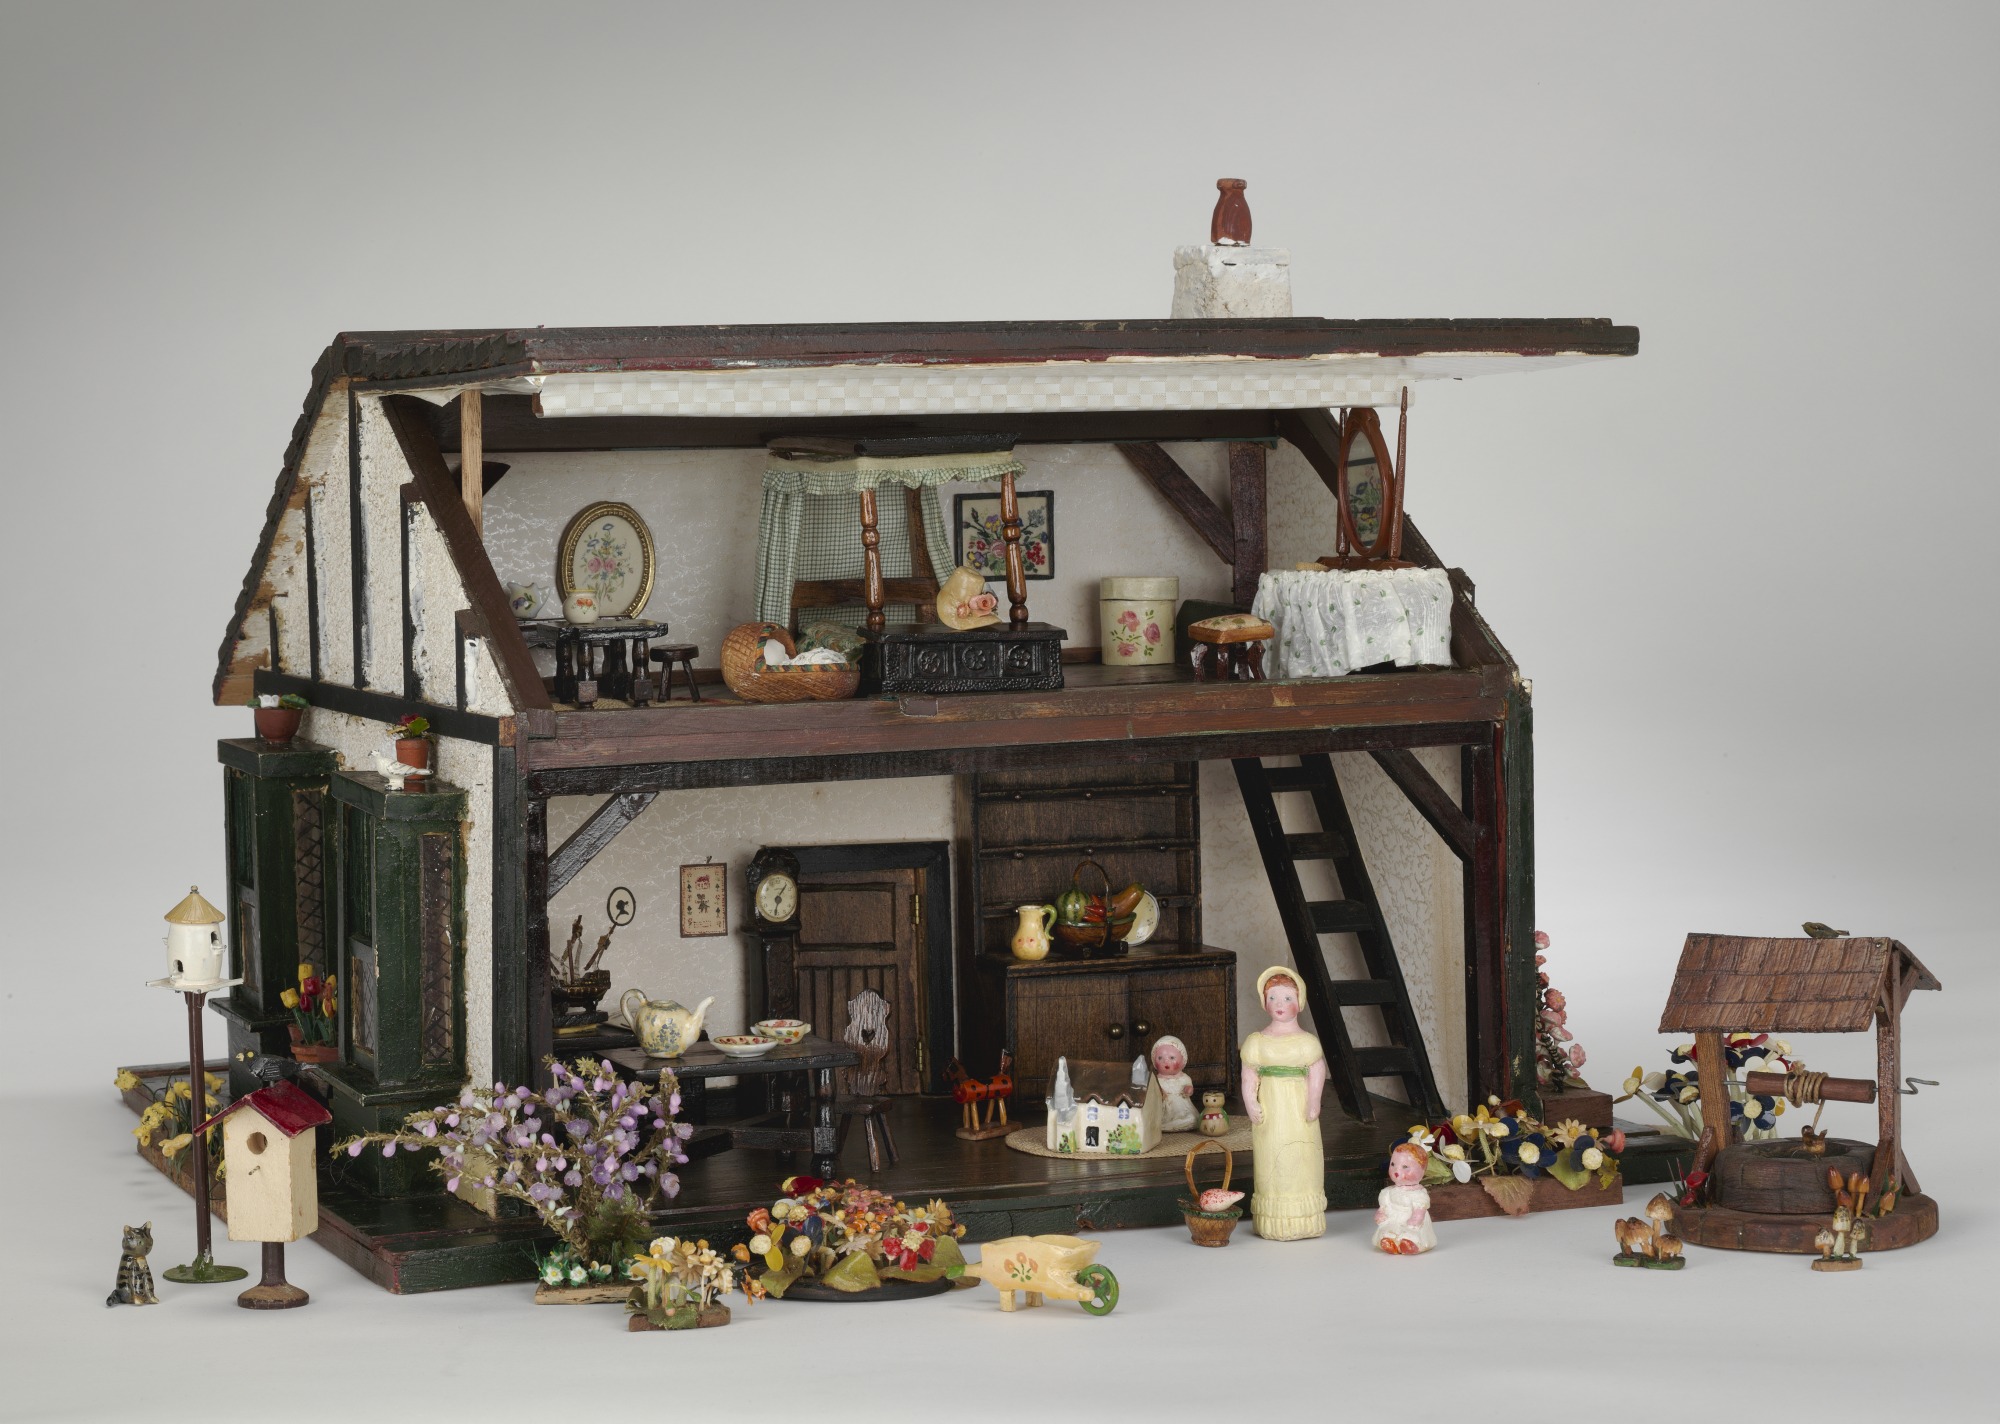 A dollhouse with the roof lifted open to reveal its interior. - click to view larger image